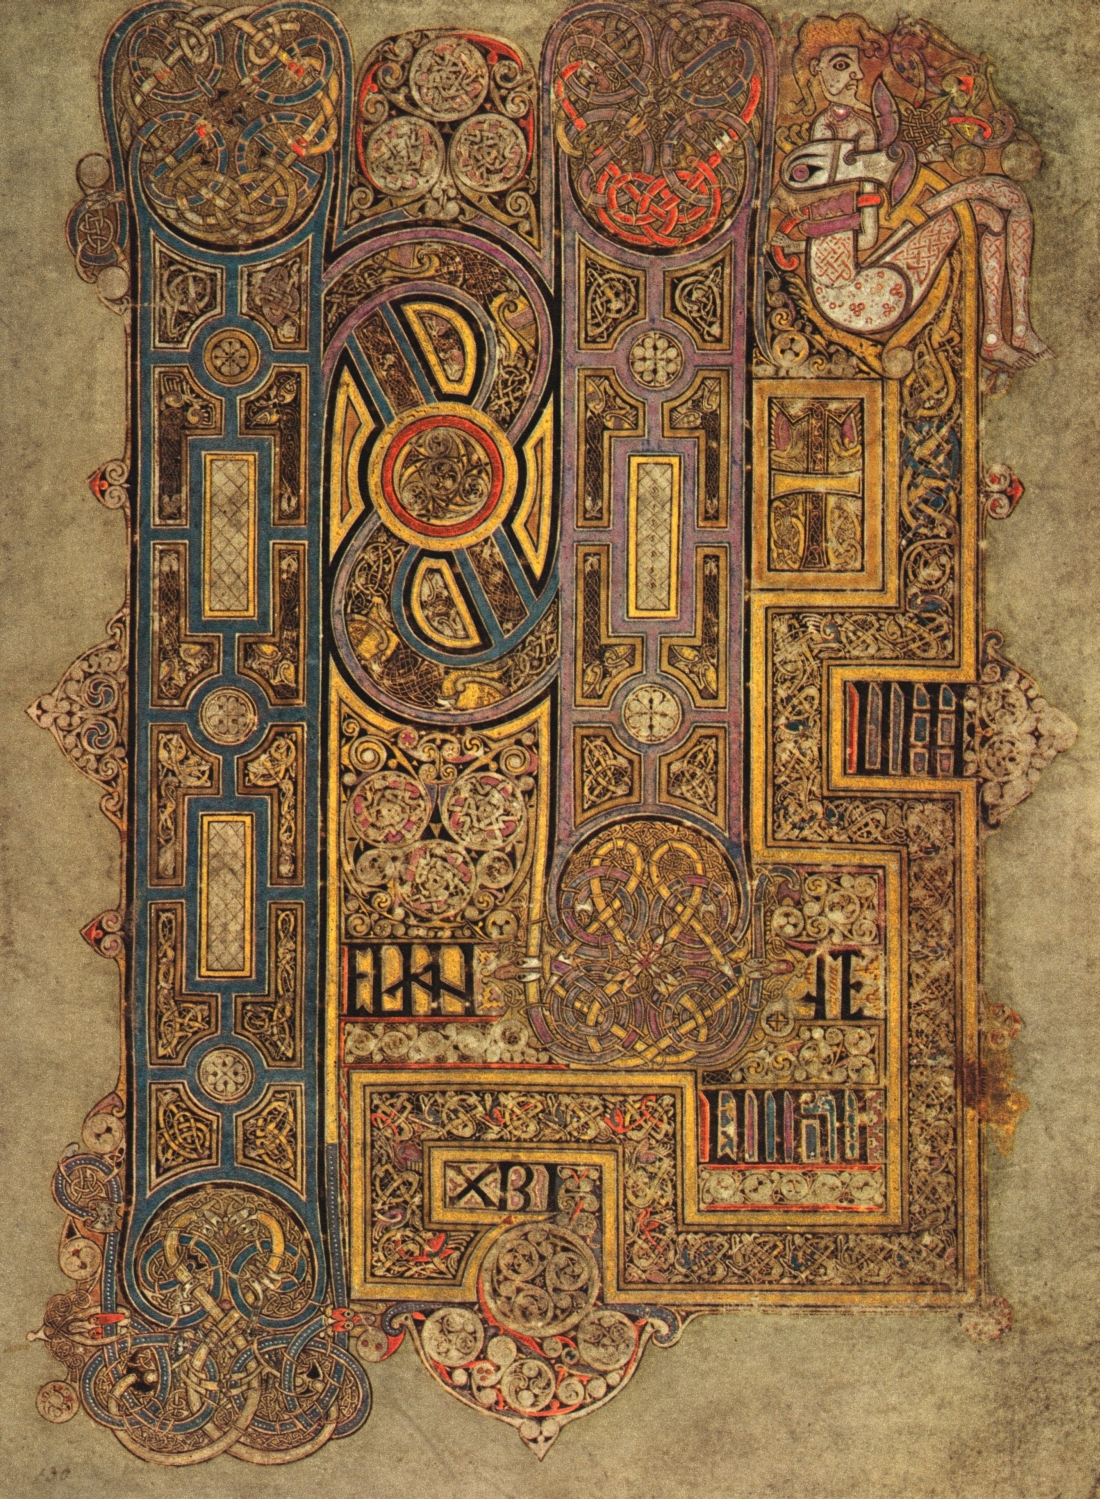 The Book of Kells - illuminated page